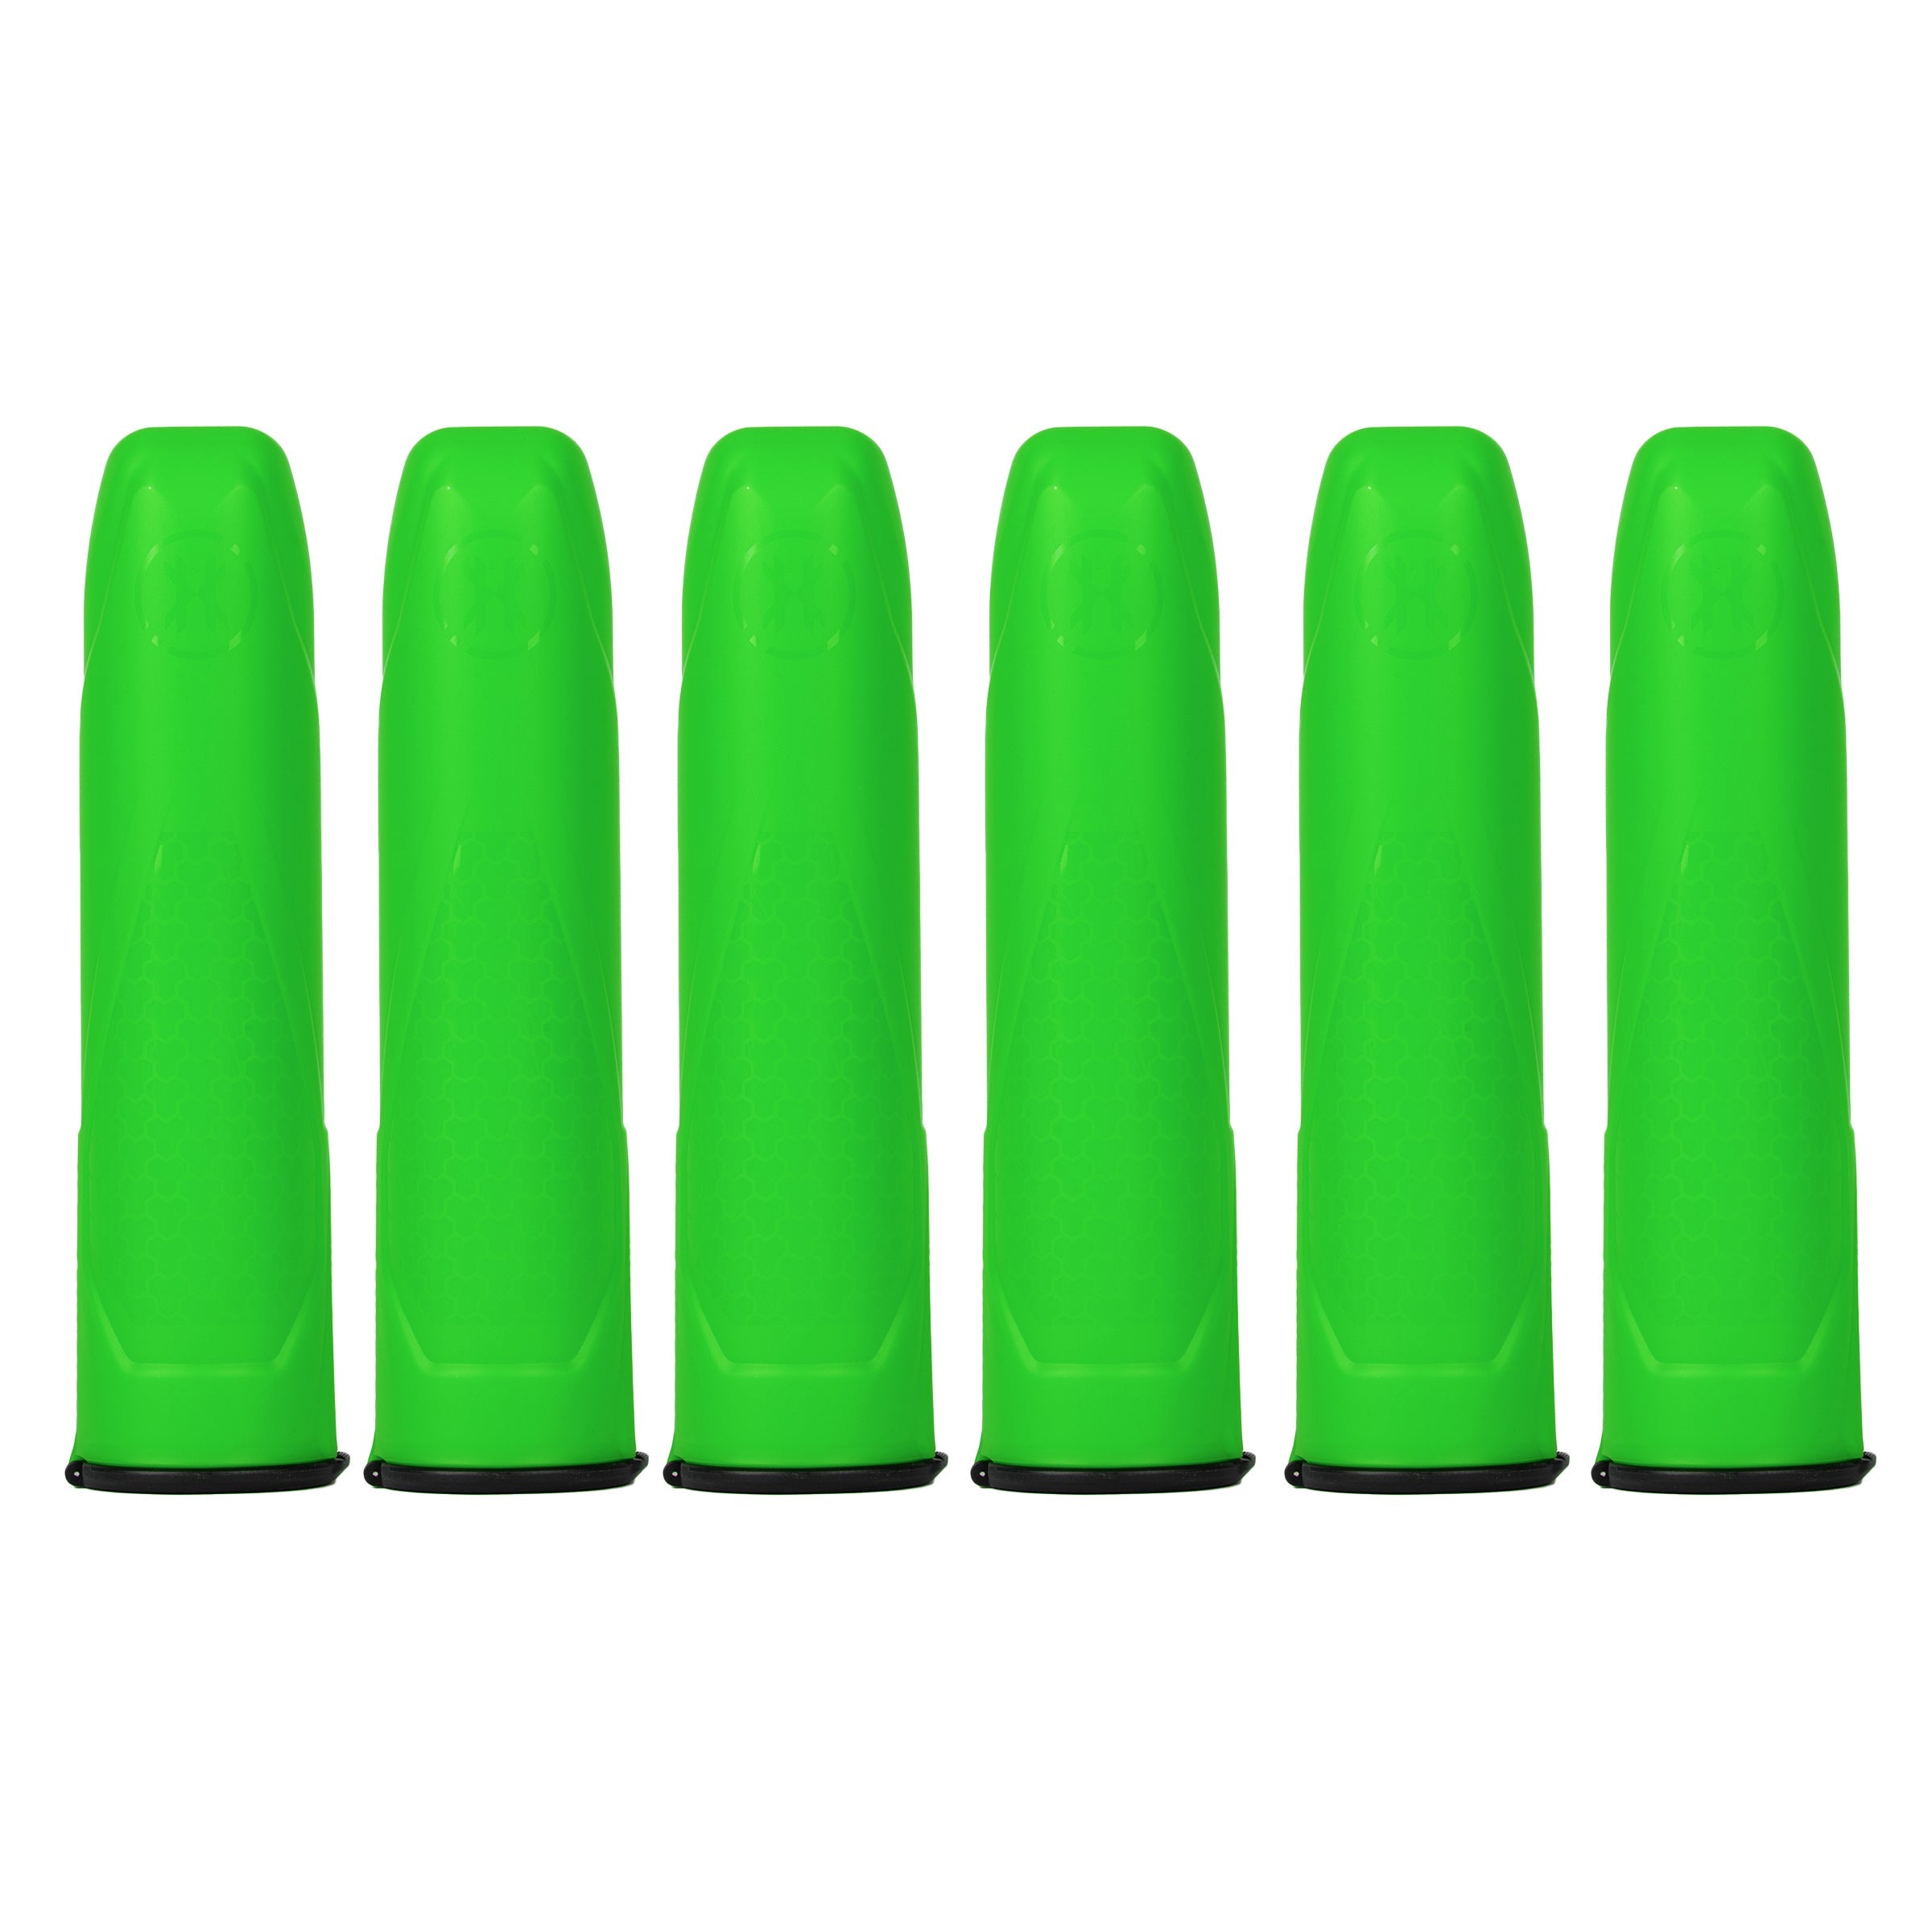 HK Army Apex 150 Round Pod - 6 Pack - Choose Your Color!